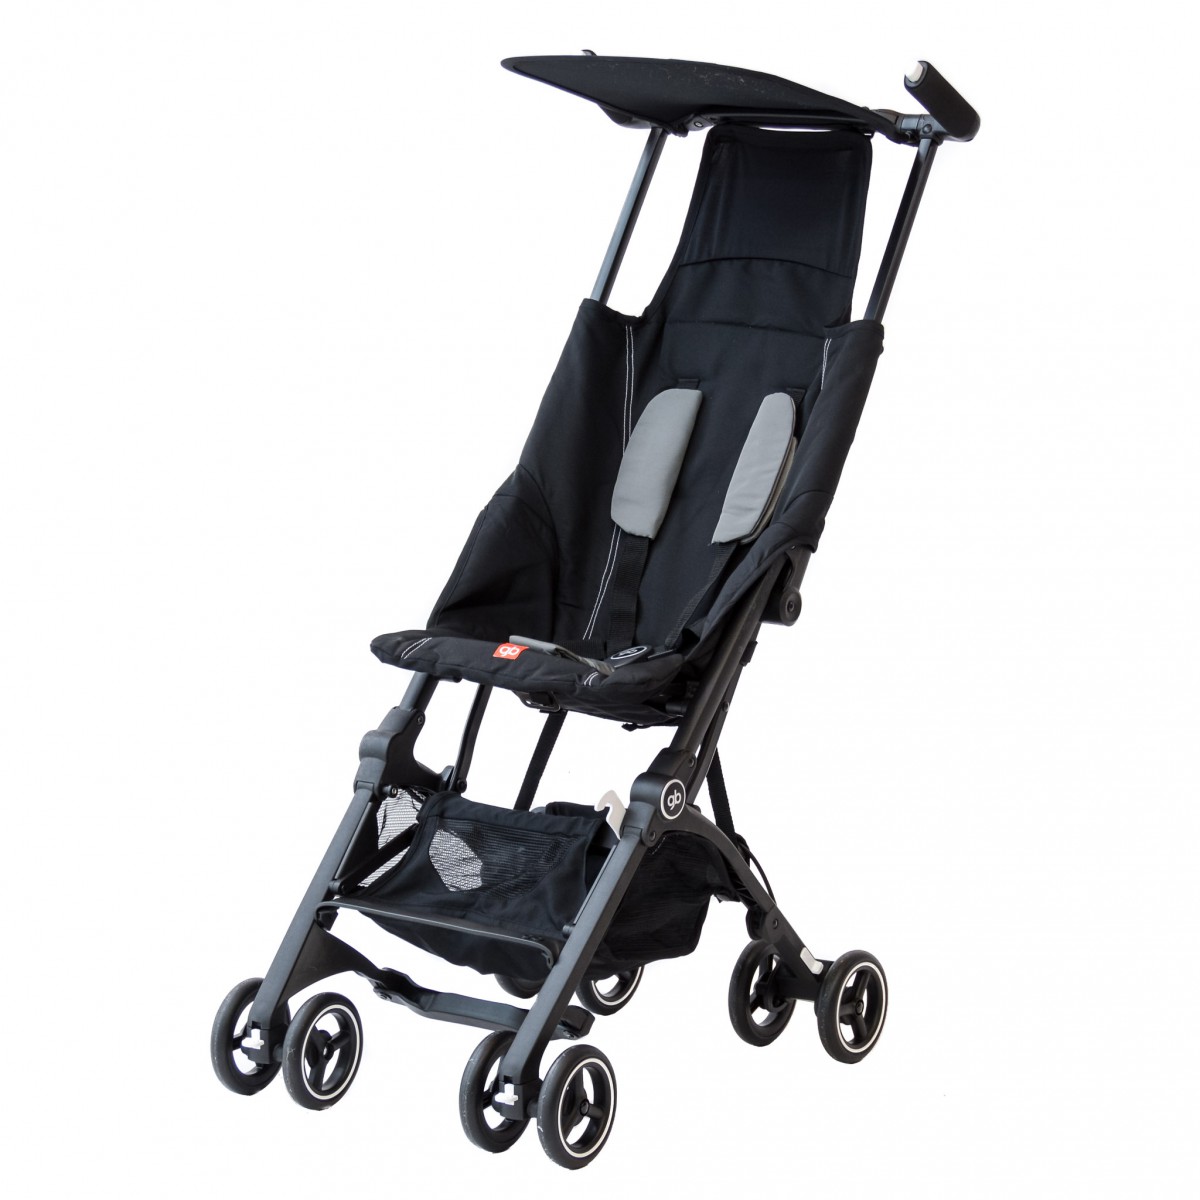 GB Pockit + All City Stroller Review